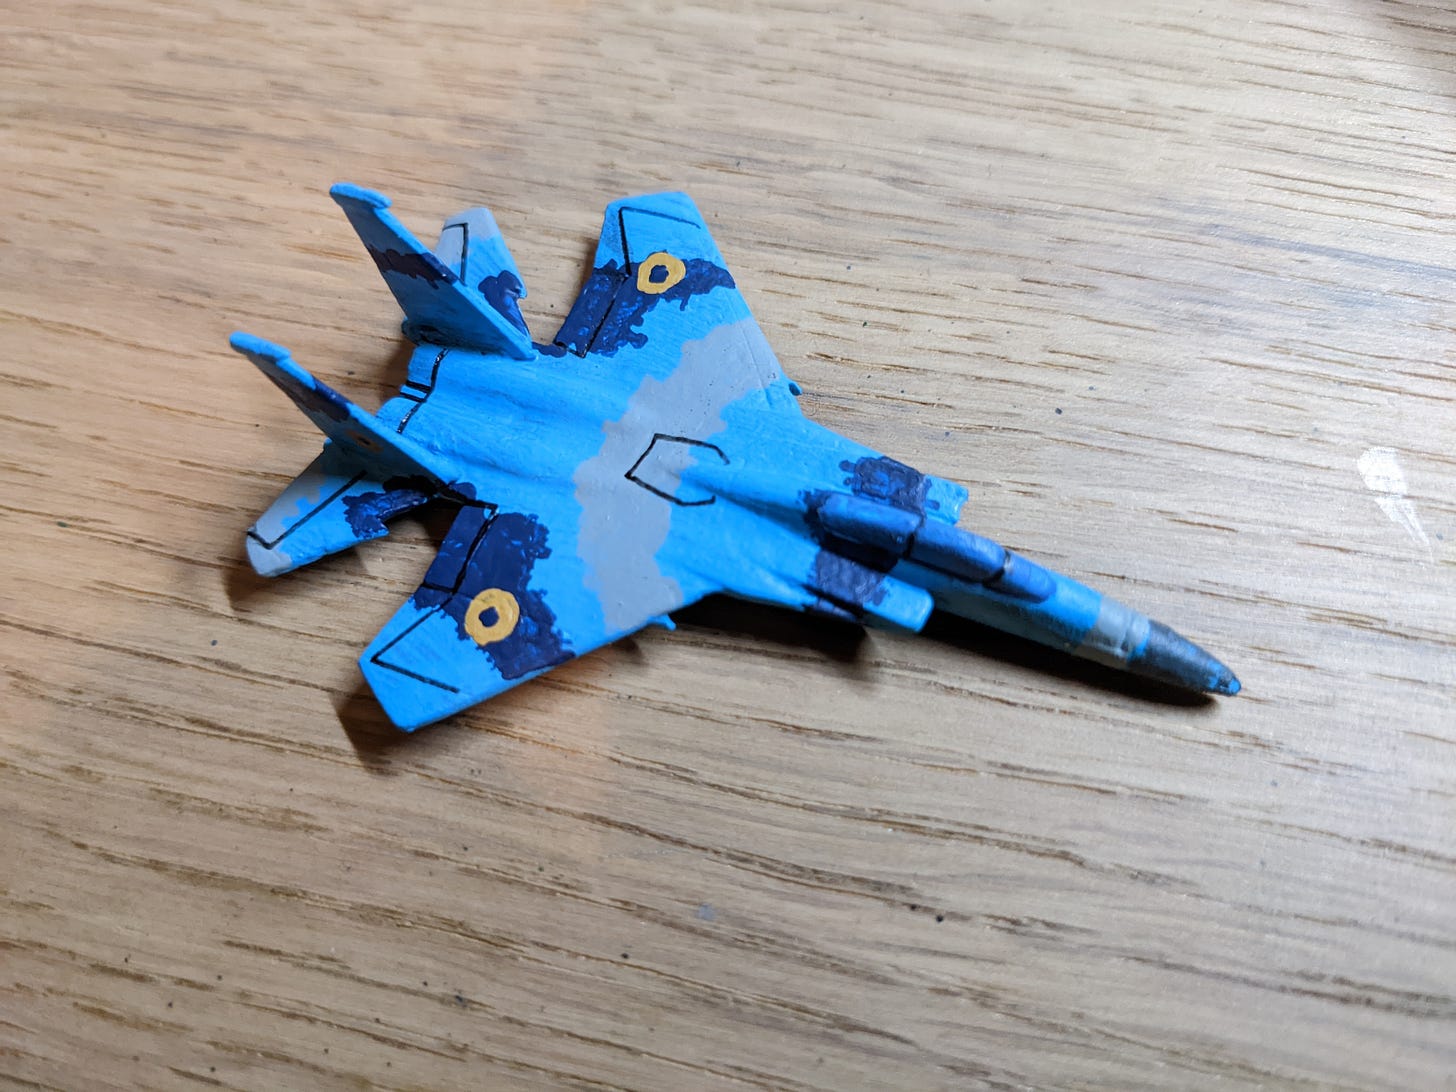 A 6 mm scale model of an F-15 fighter jet painted in the blue, grey and light blue of the Ukrainian Air Force